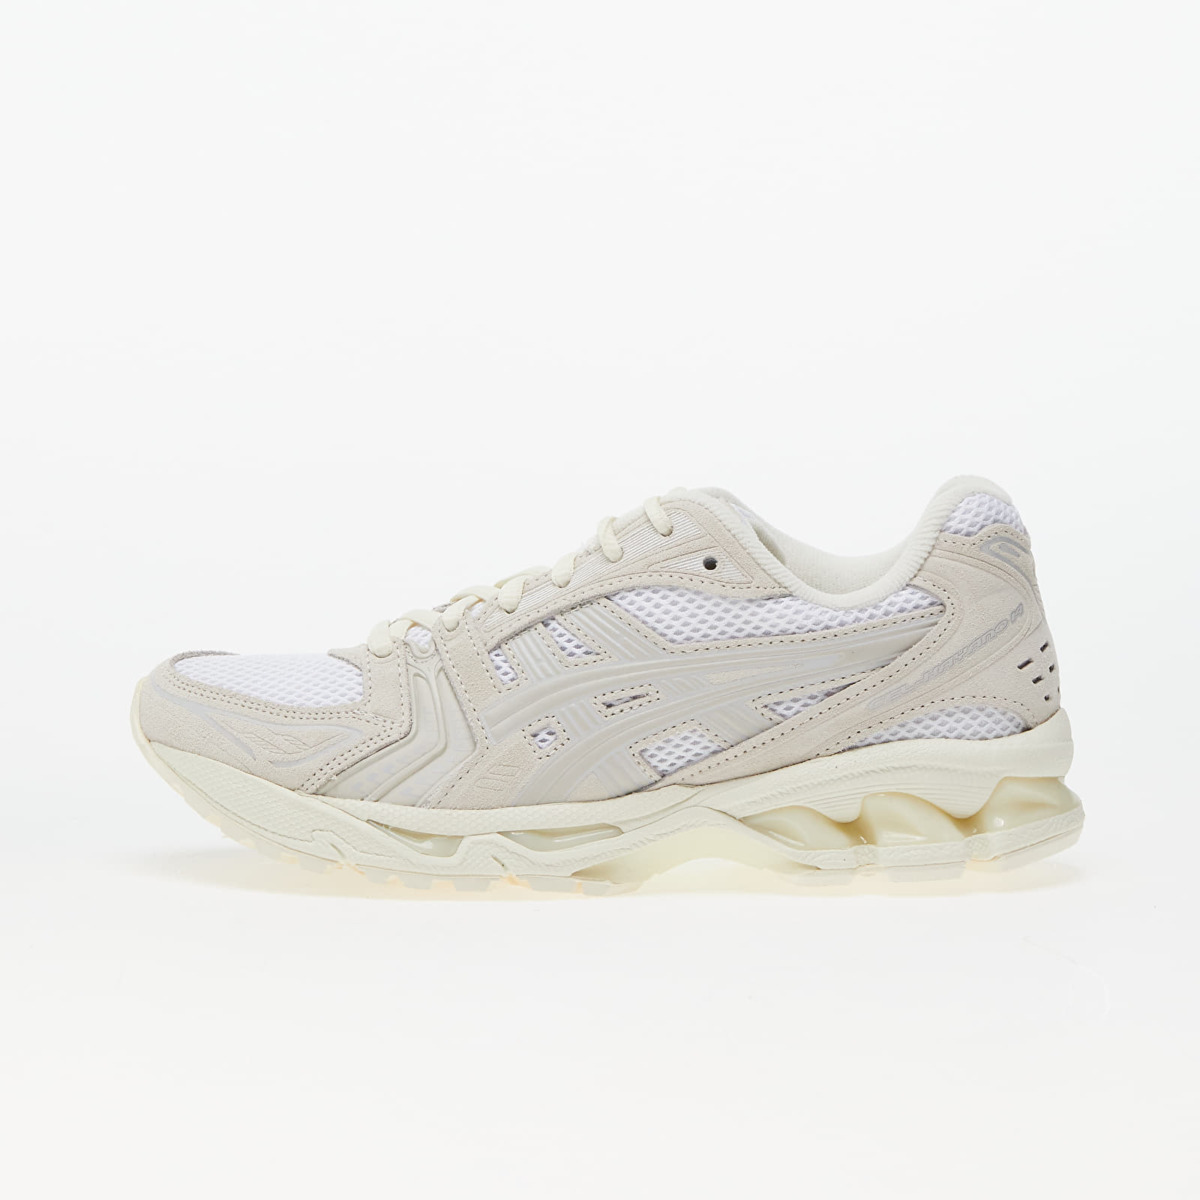 Footshop - Gel Running Shoes in White by Asics GOOFASH